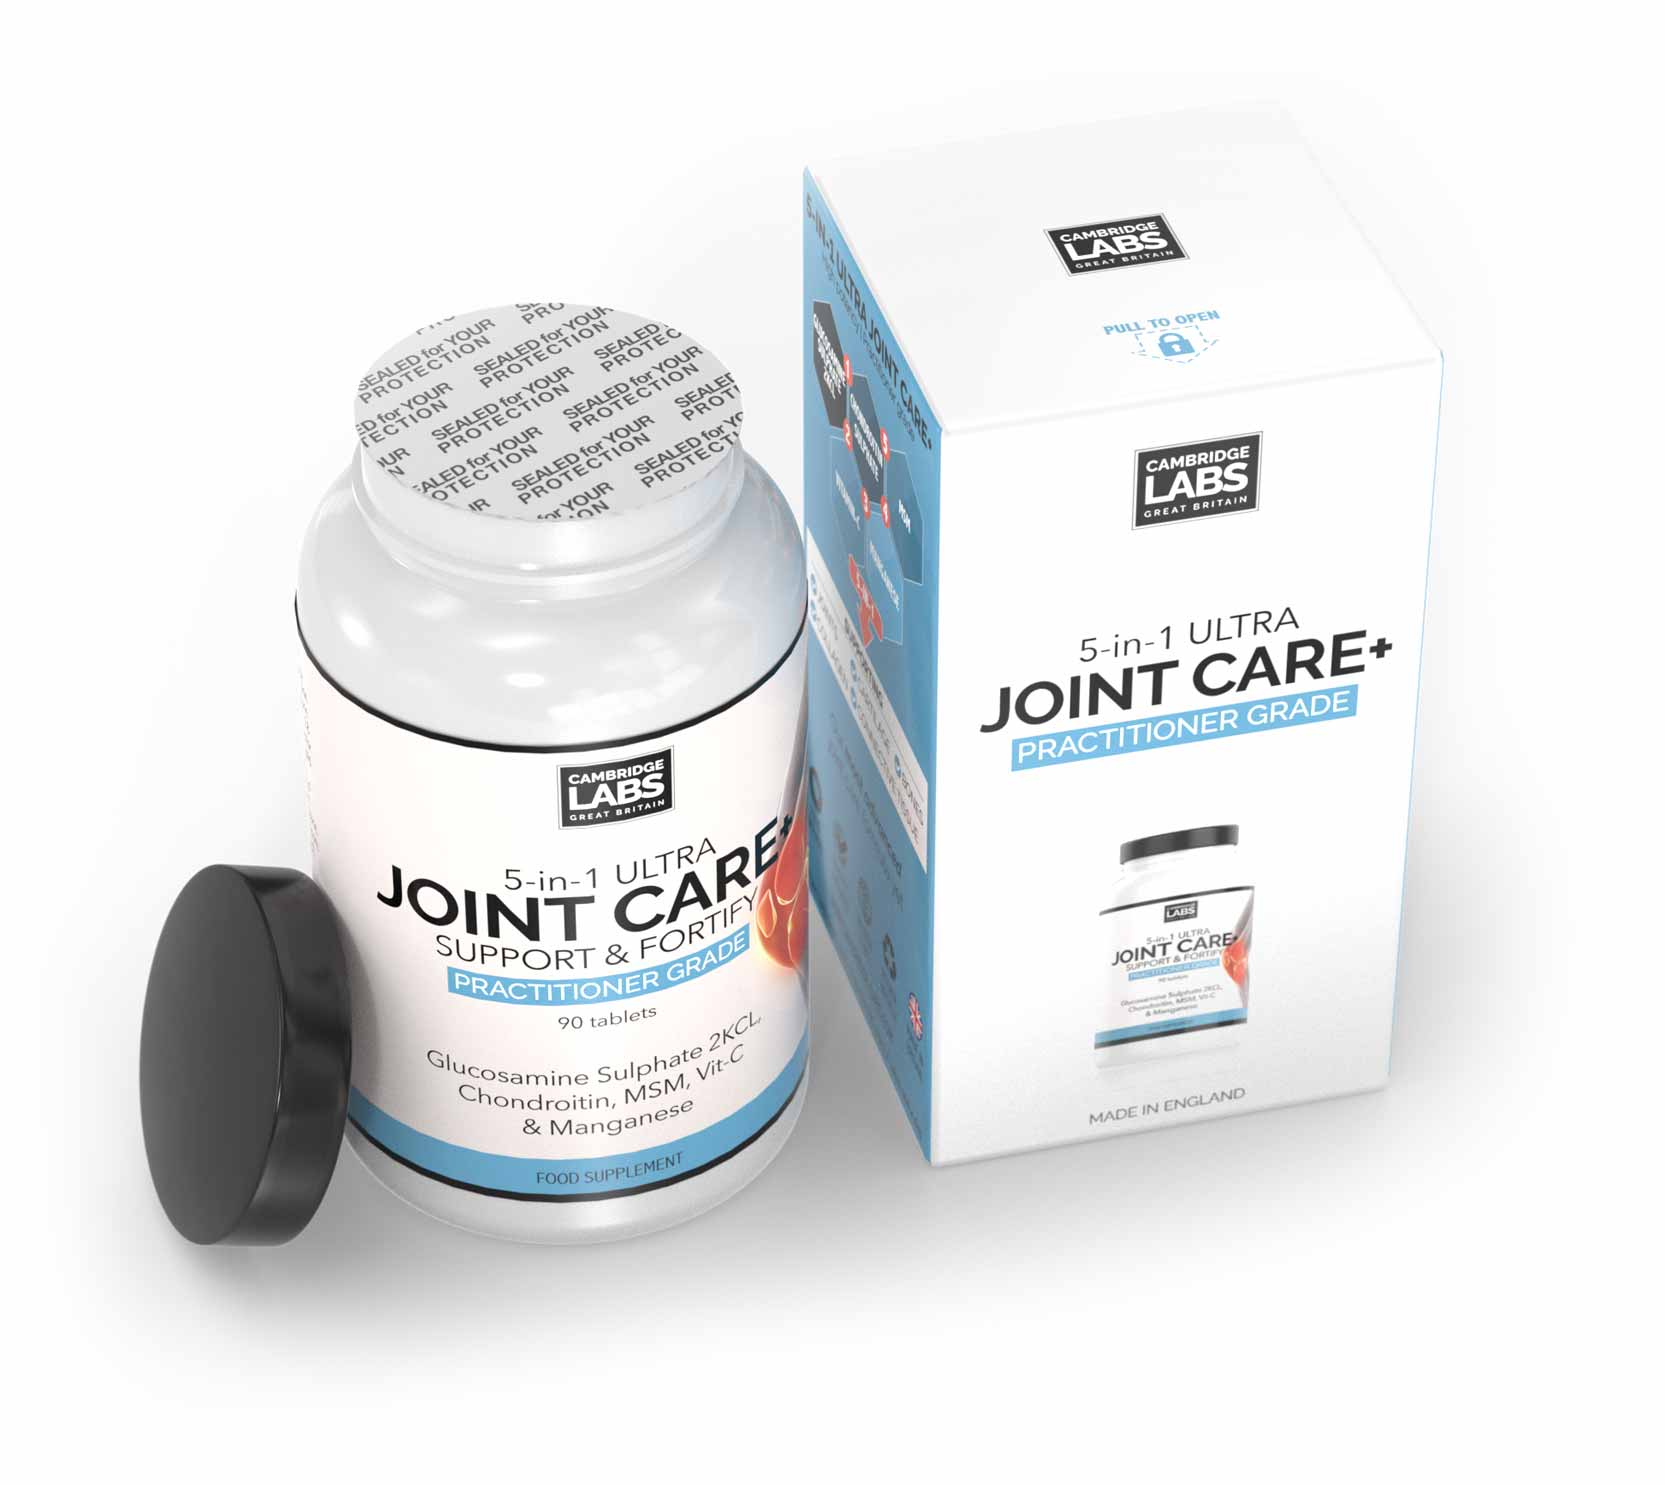 5-in-1 Ultra Joint Care Plus - Clior / Cambridge Labs